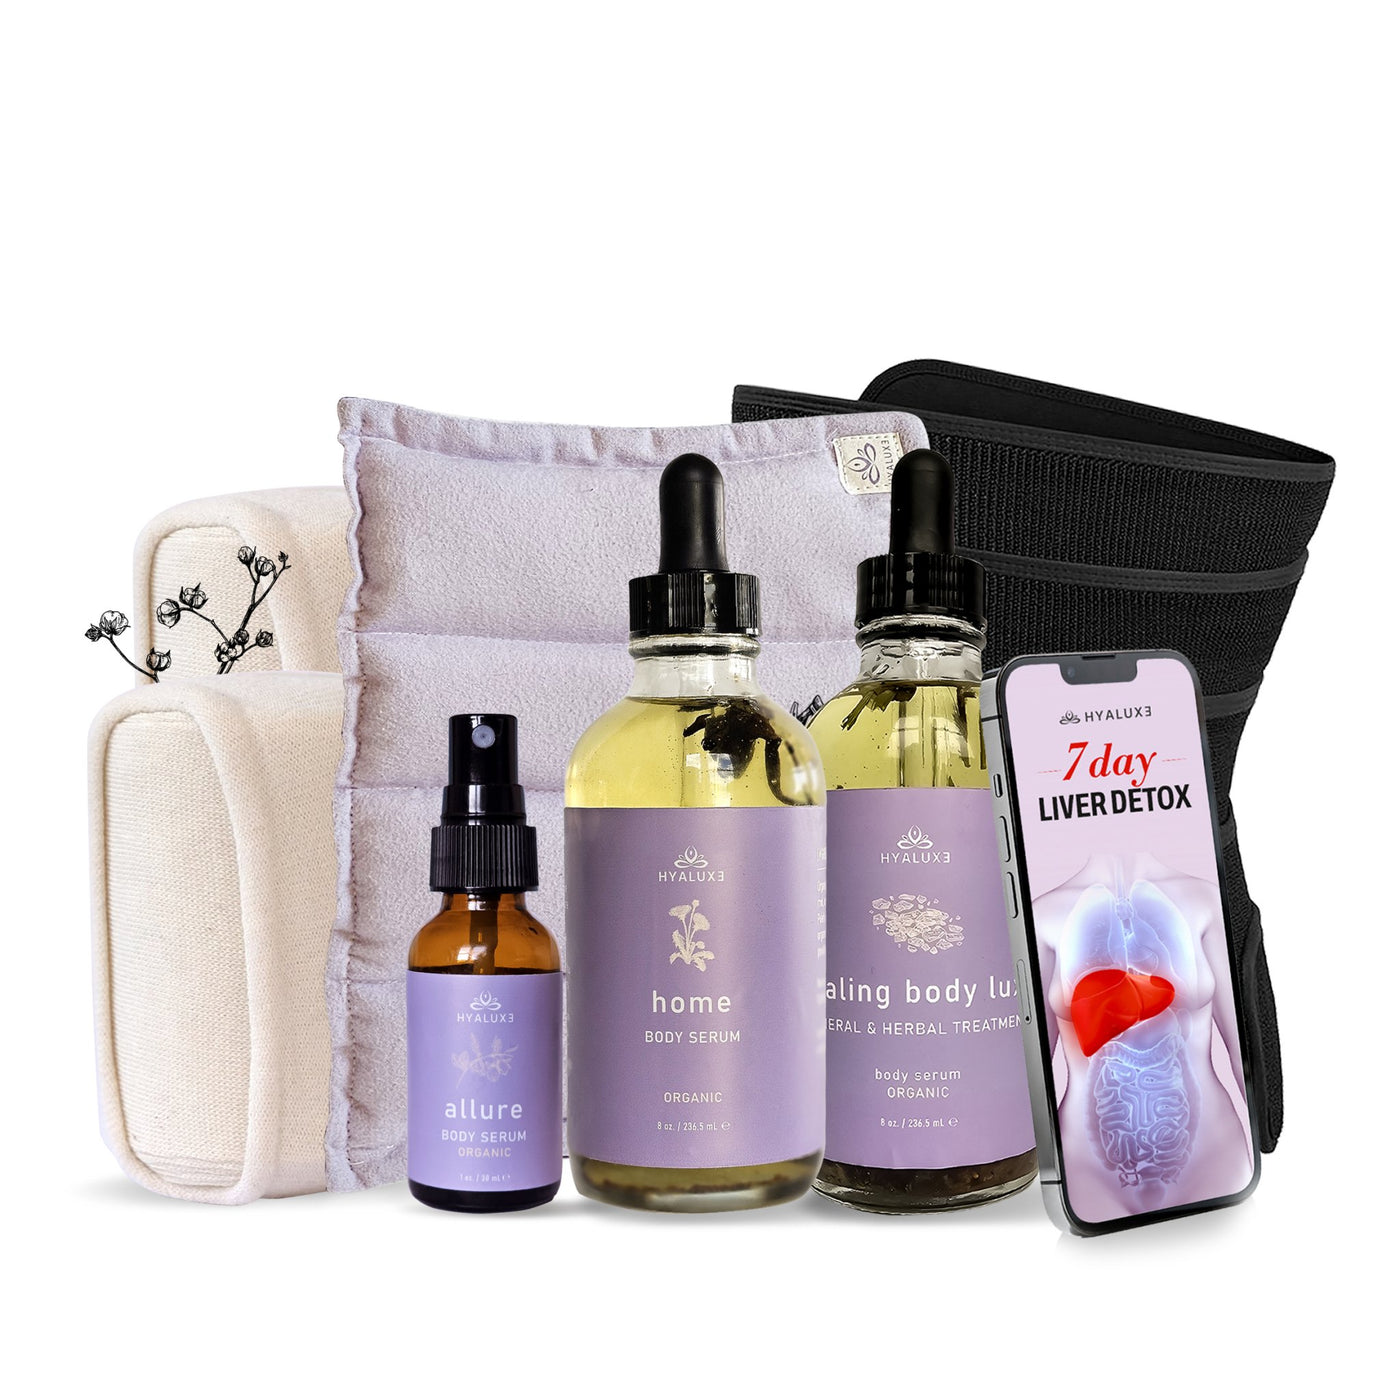 Fat Loss and Gut Healing Complete Bundle with HOME Castor Oil Serum, Mg Herbal Serum, Heating Pad and Benefit Enhancement Wraps - Hyaluxe Body